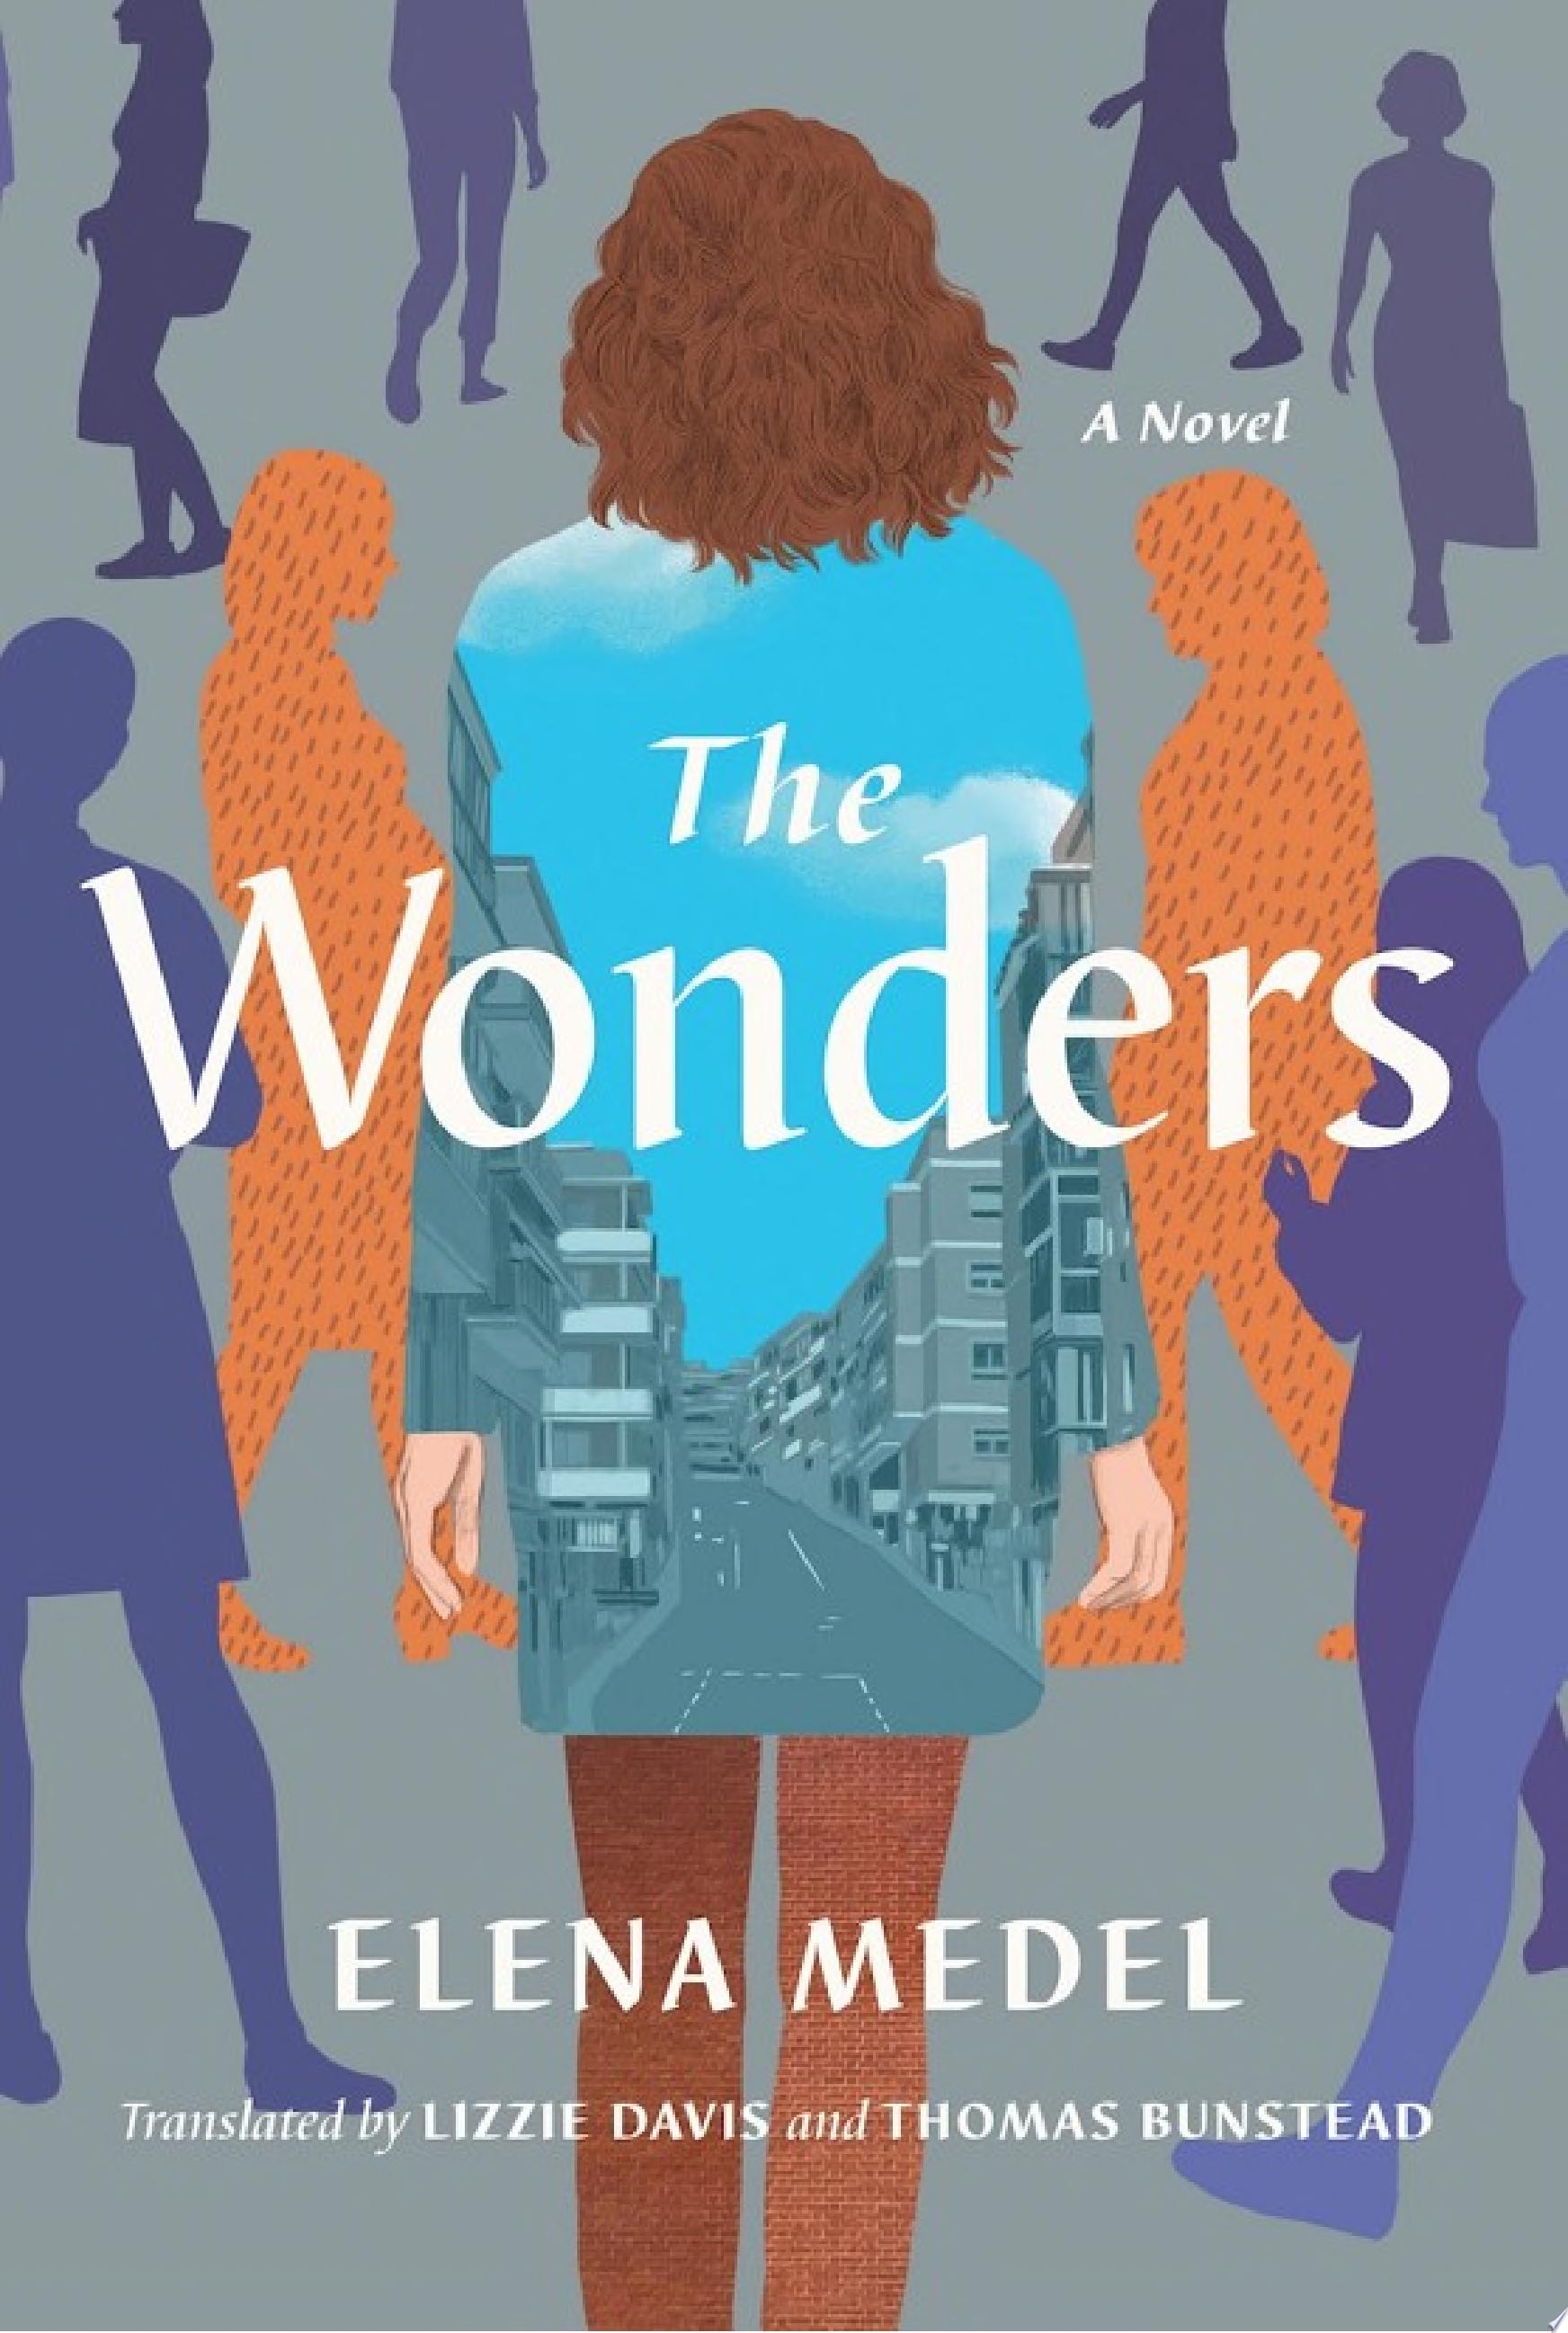 Image for "The Wonders"